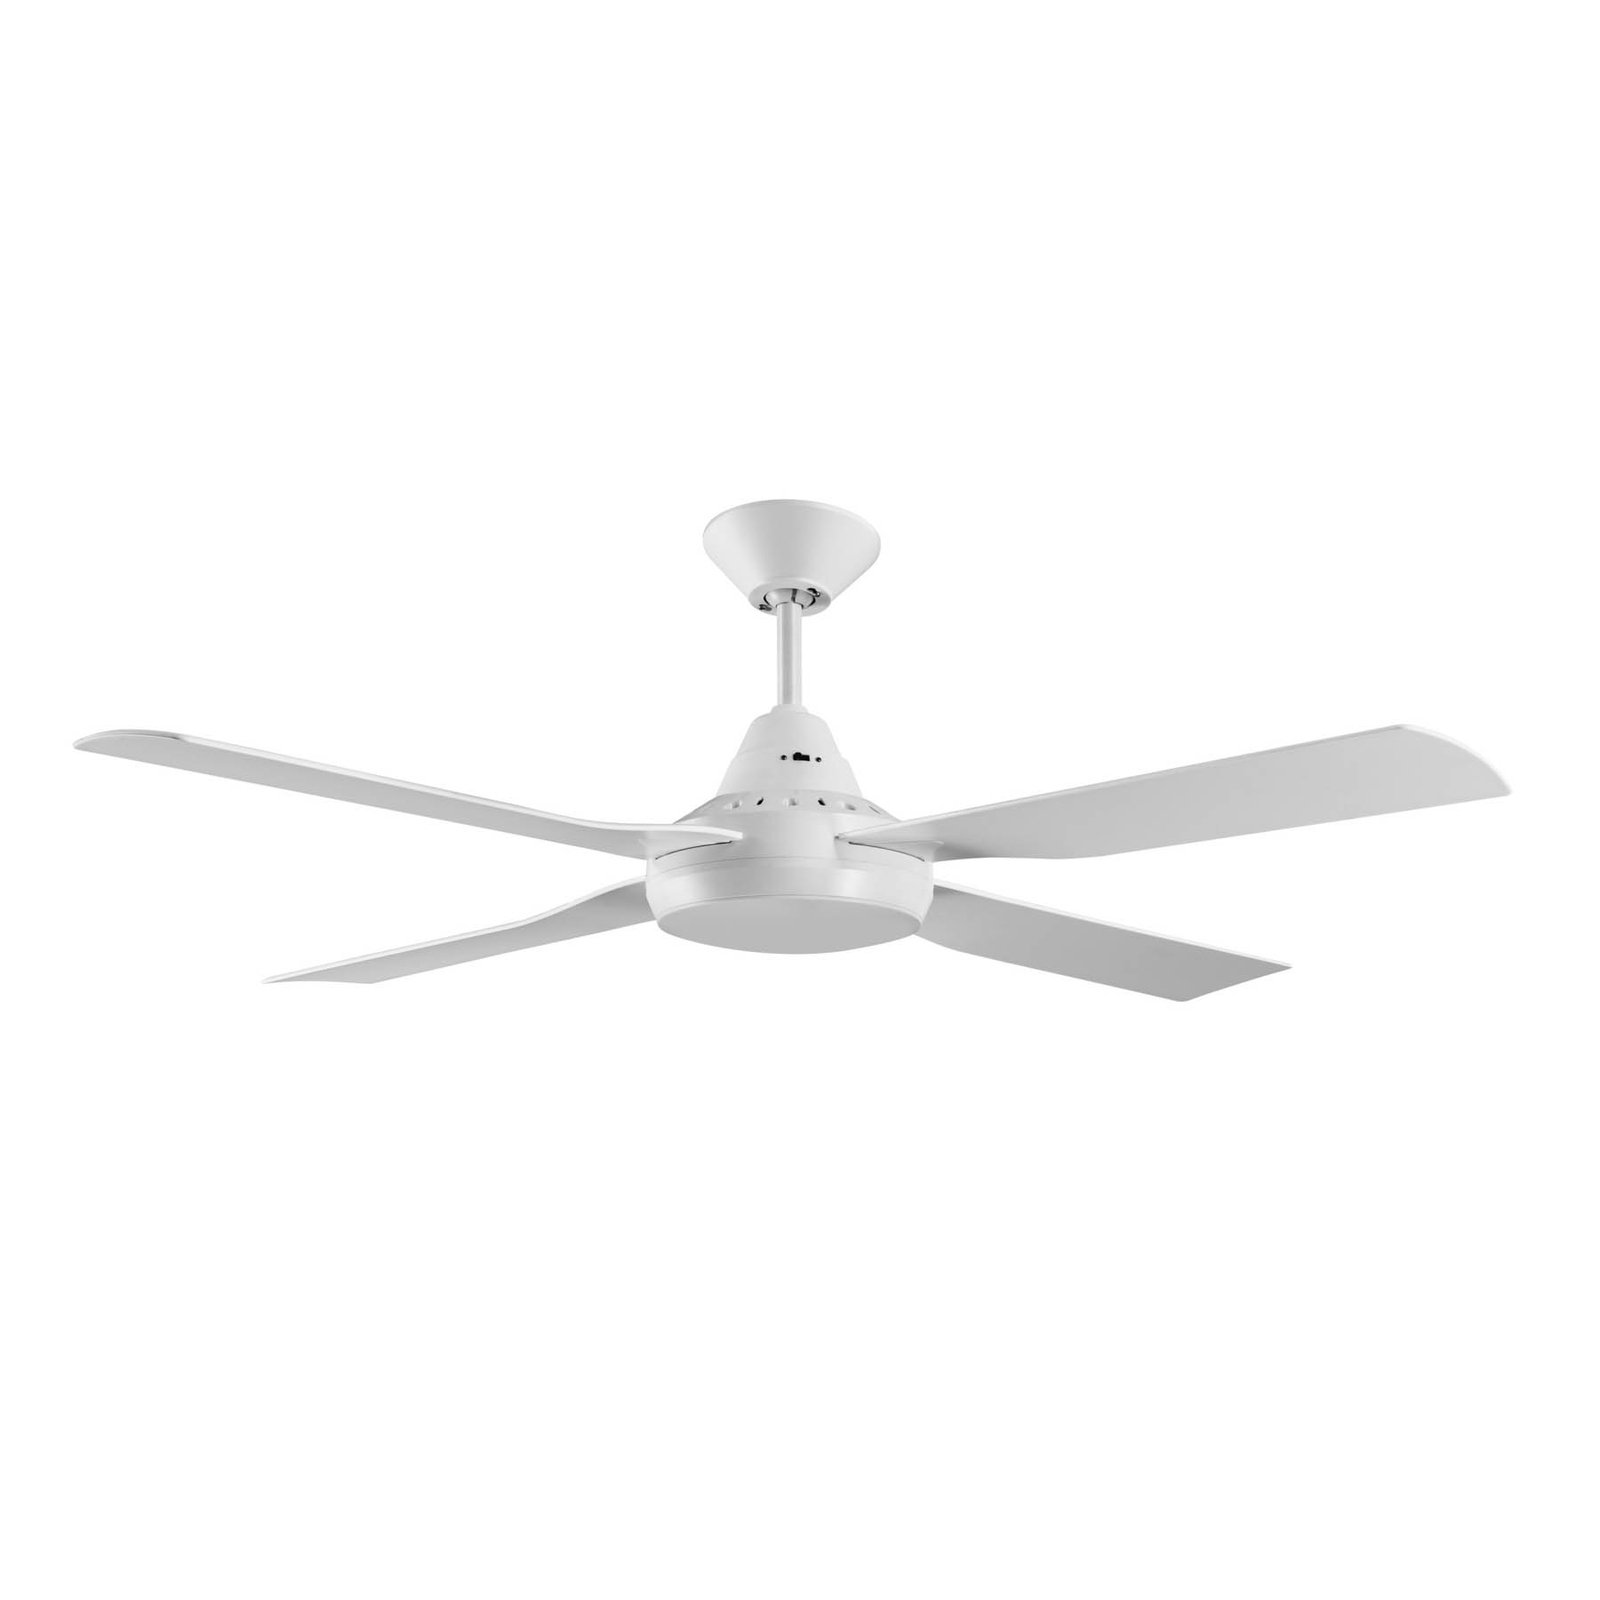 Beacon ceiling fan with light Moonah, white, quiet